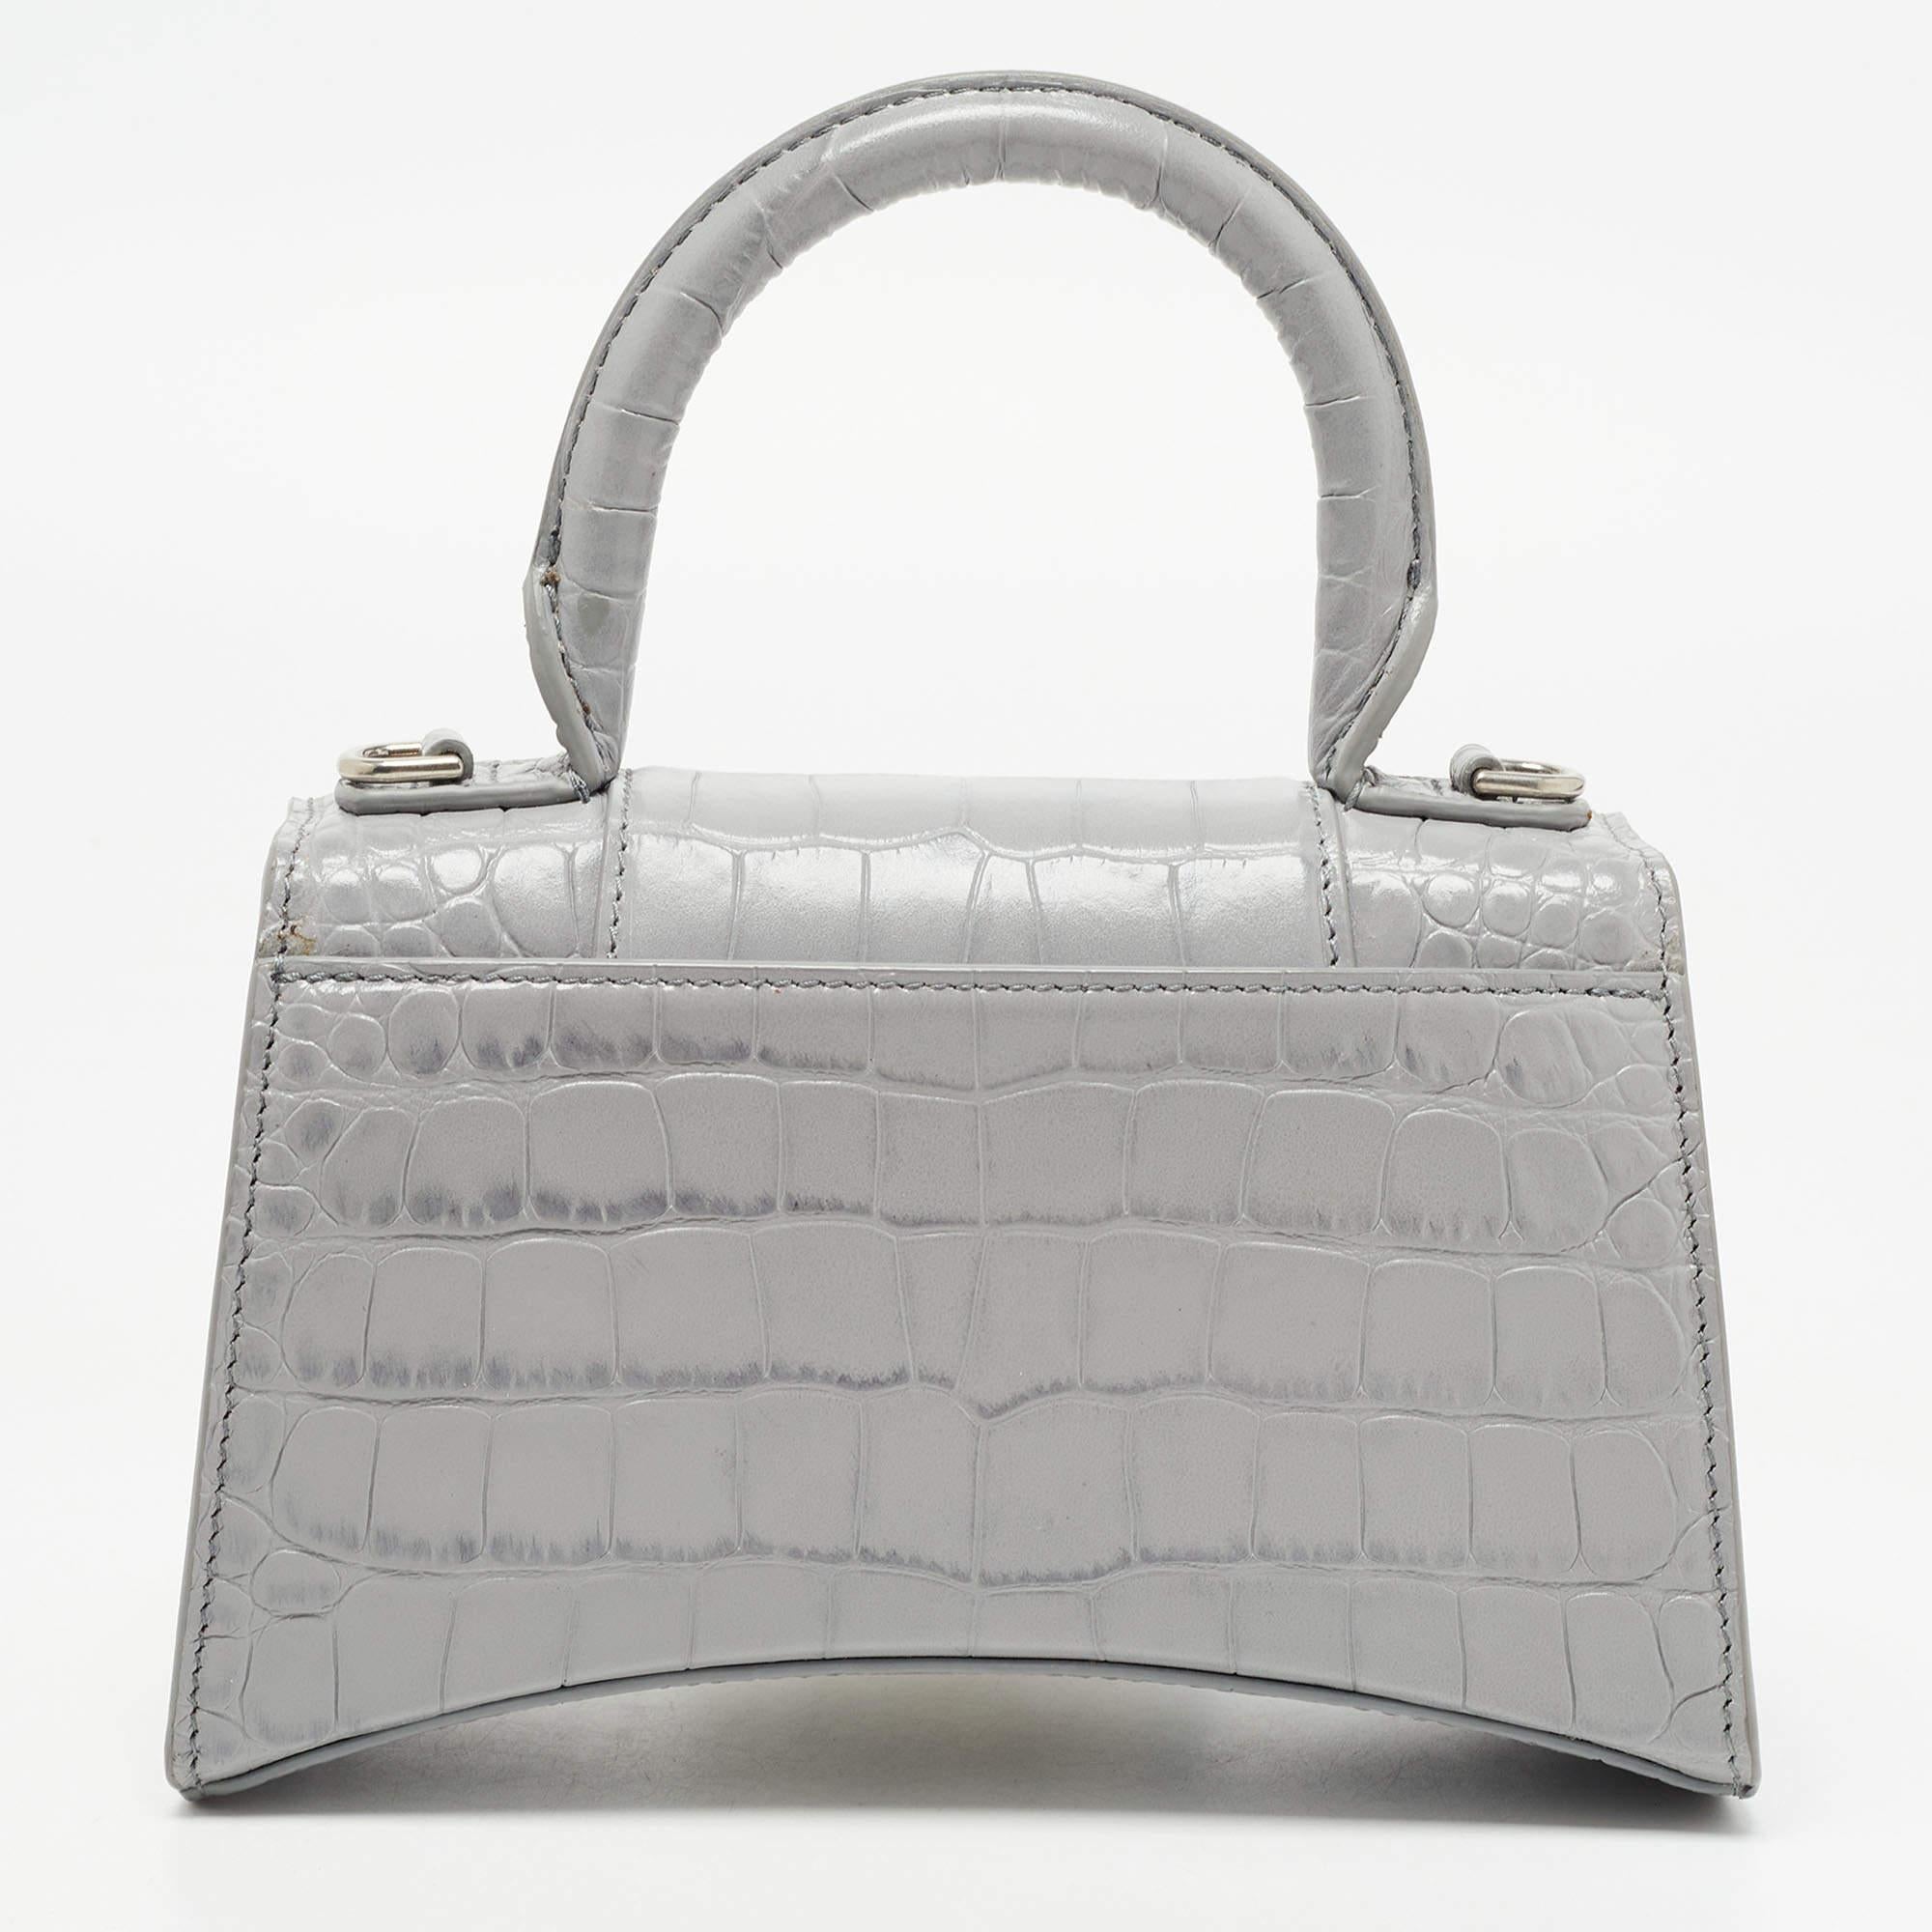 Balenciaga's Hourglass is inspired by the silhouettes of its sculptural blazers of the 1950s and, with its very distinctive shape, knows how to start a conversation. The curved bottom of this croc-embossed leather construction is beautifully